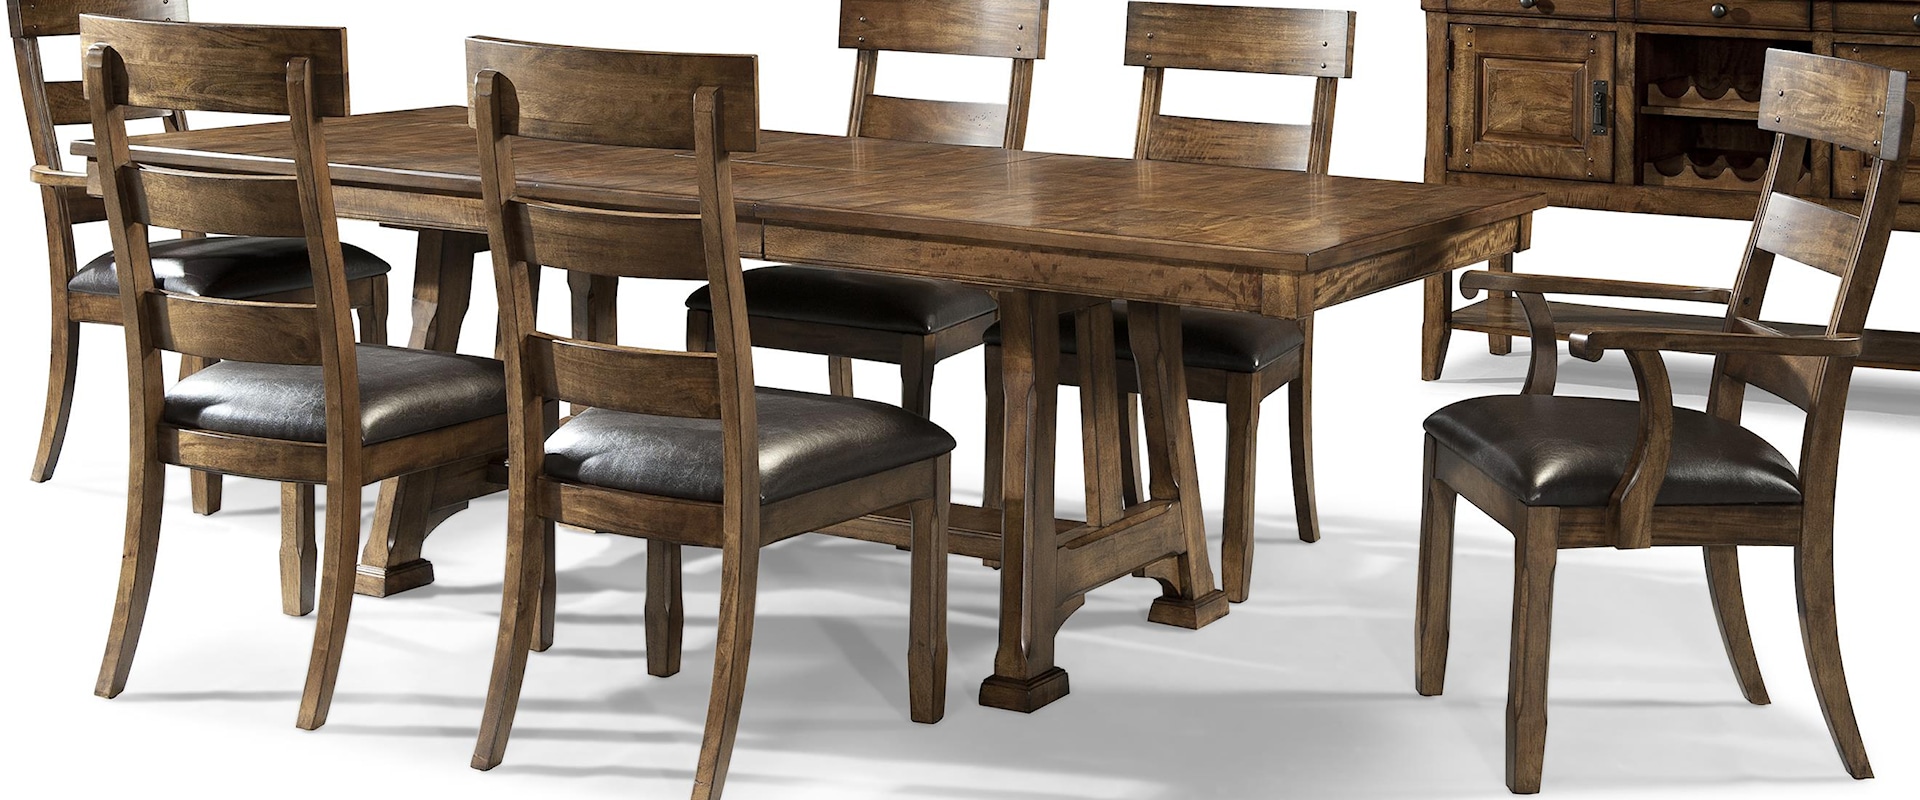 Transitional 7 Piece Trestle Table and Plank Chair Set